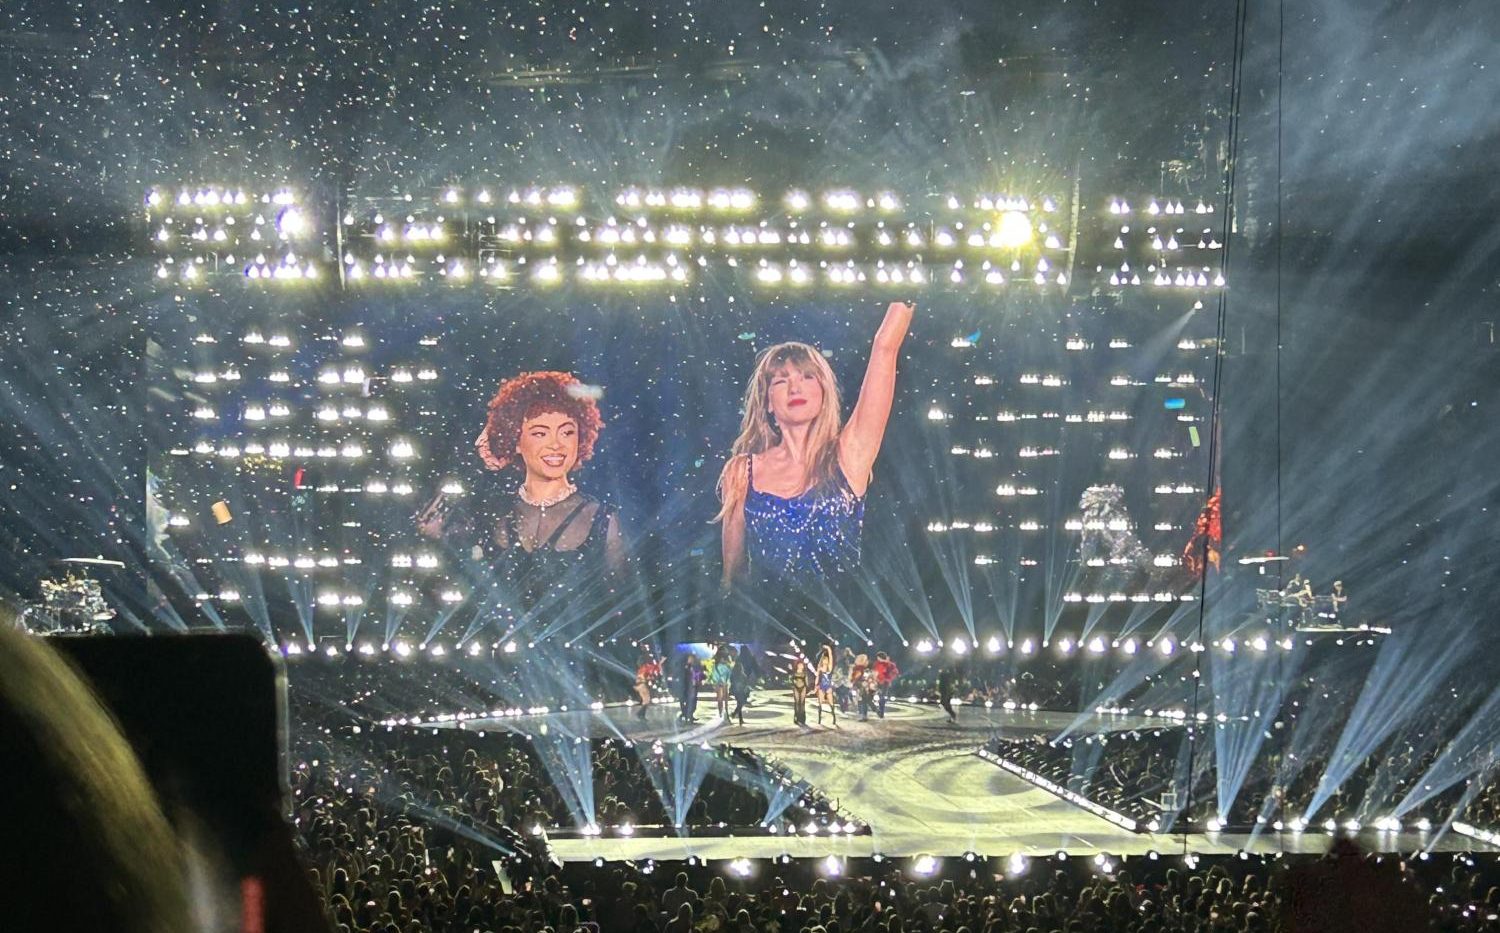 Swifts Eras Tour performance at MetLife stadium put her music catalogue on full display for her fans.